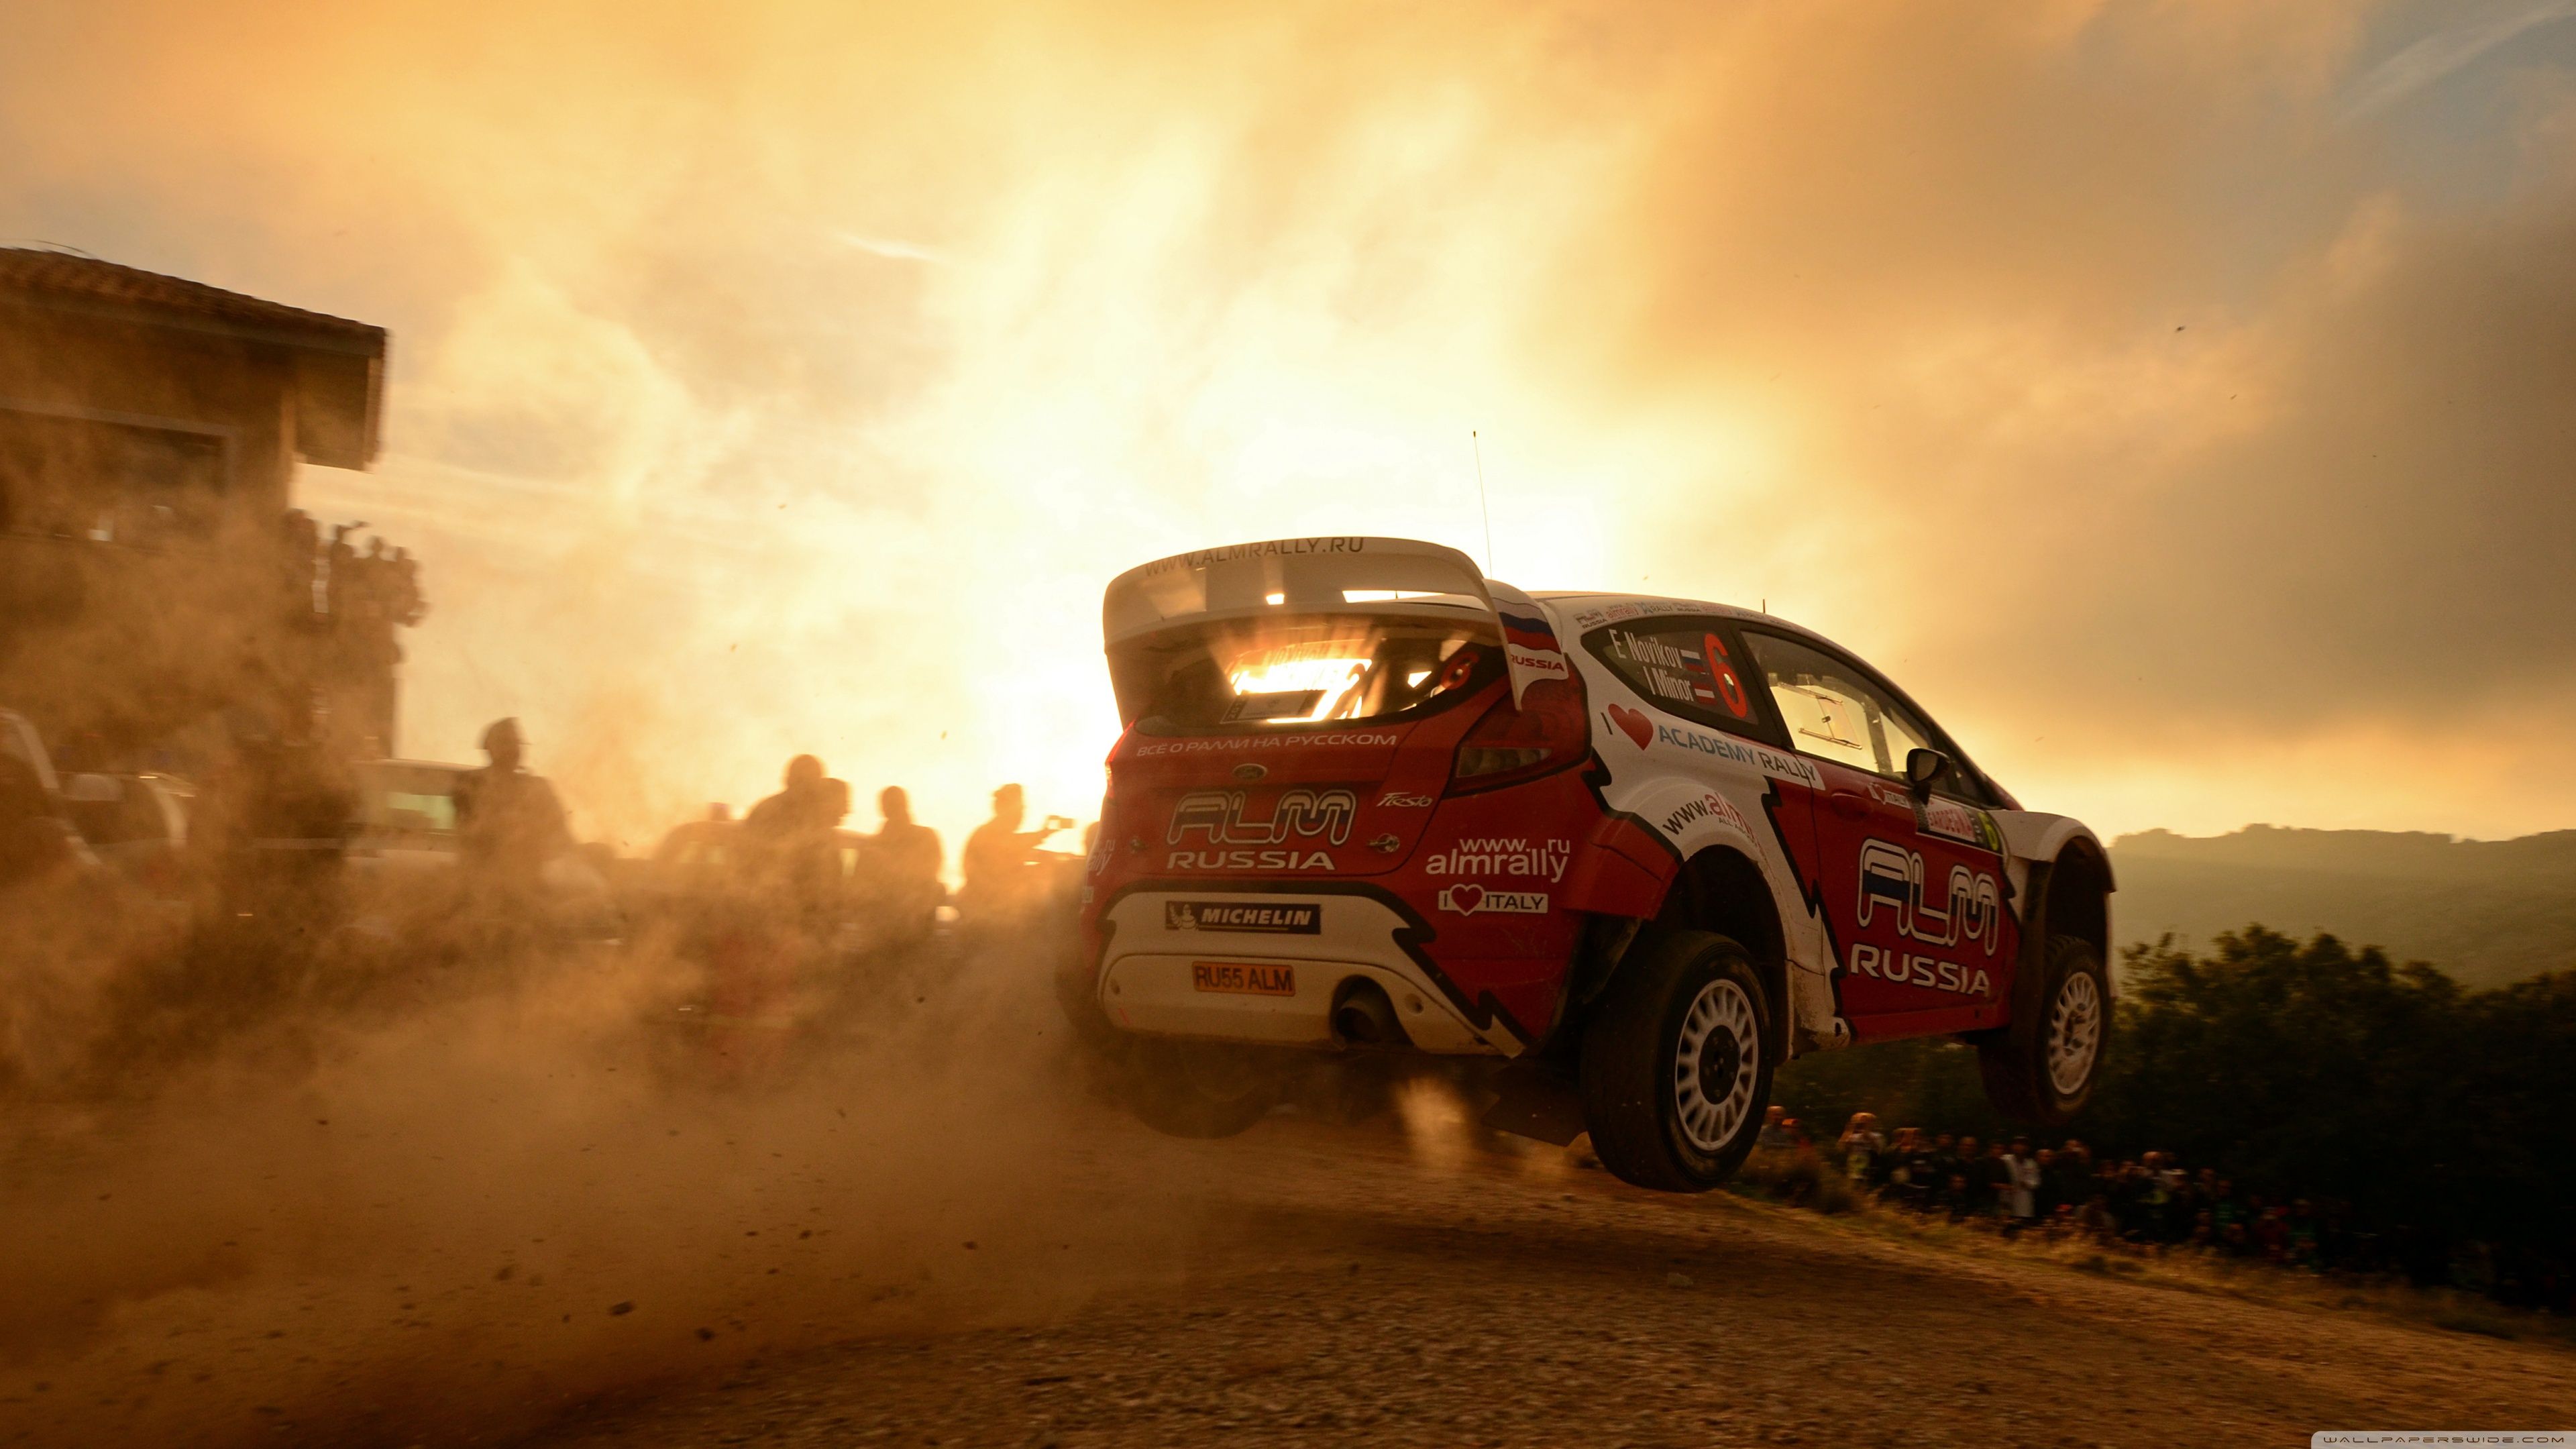 Rally Ford Ultra HD Desktop Background Wallpaper for: Multi Display, Dual Monitor, Tablet